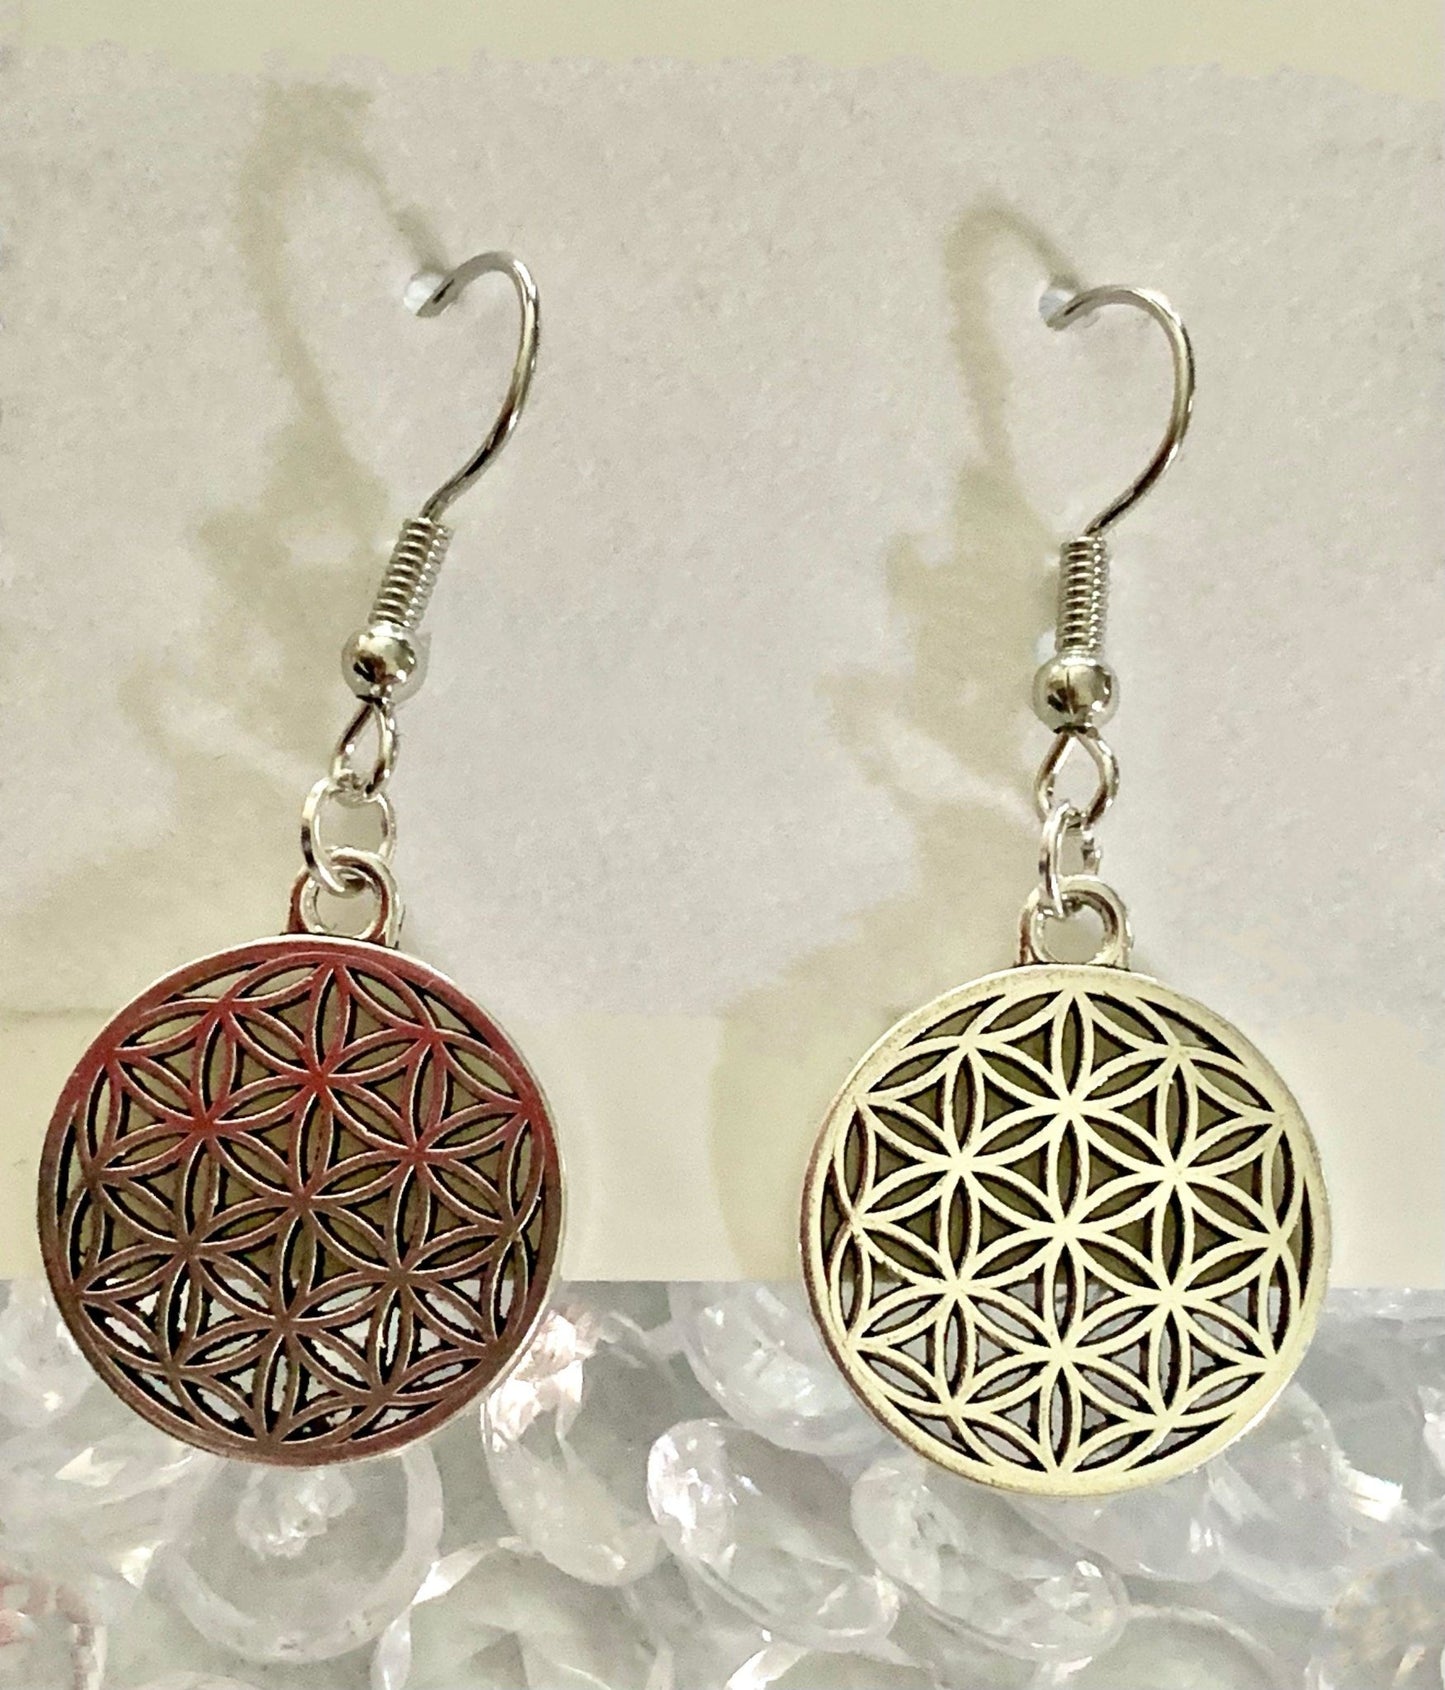 🔴SOLD🔴 Flower of Life Silver Plated Earrings - Born Mystics